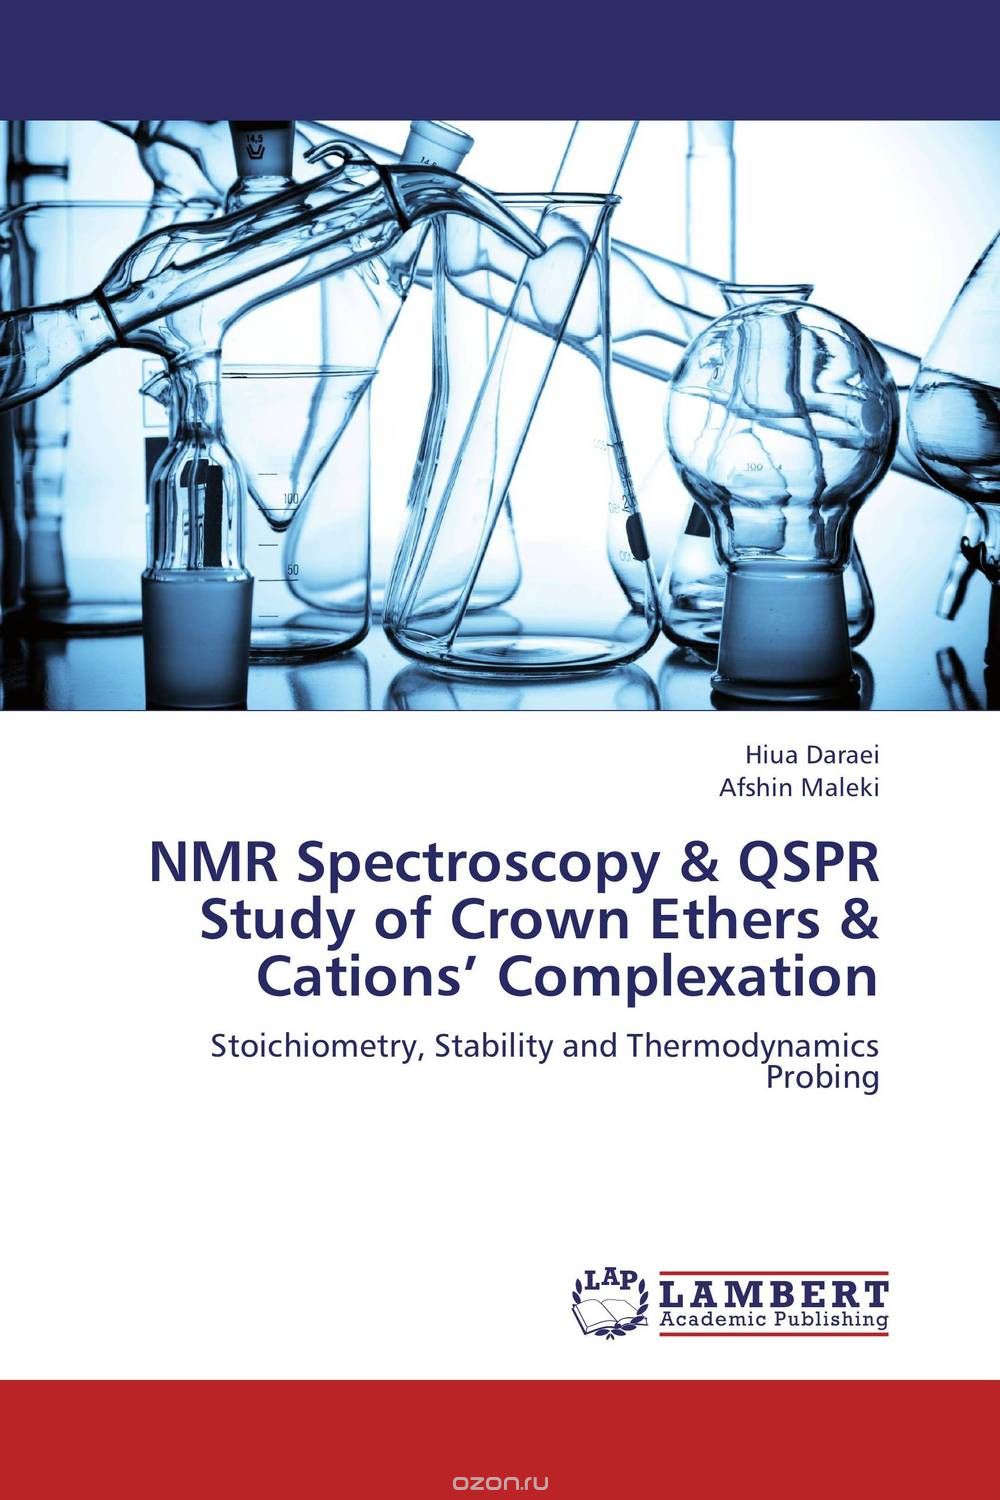 NMR Spectroscopy & QSPR Study of Crown Ethers & Cations’ Complexation